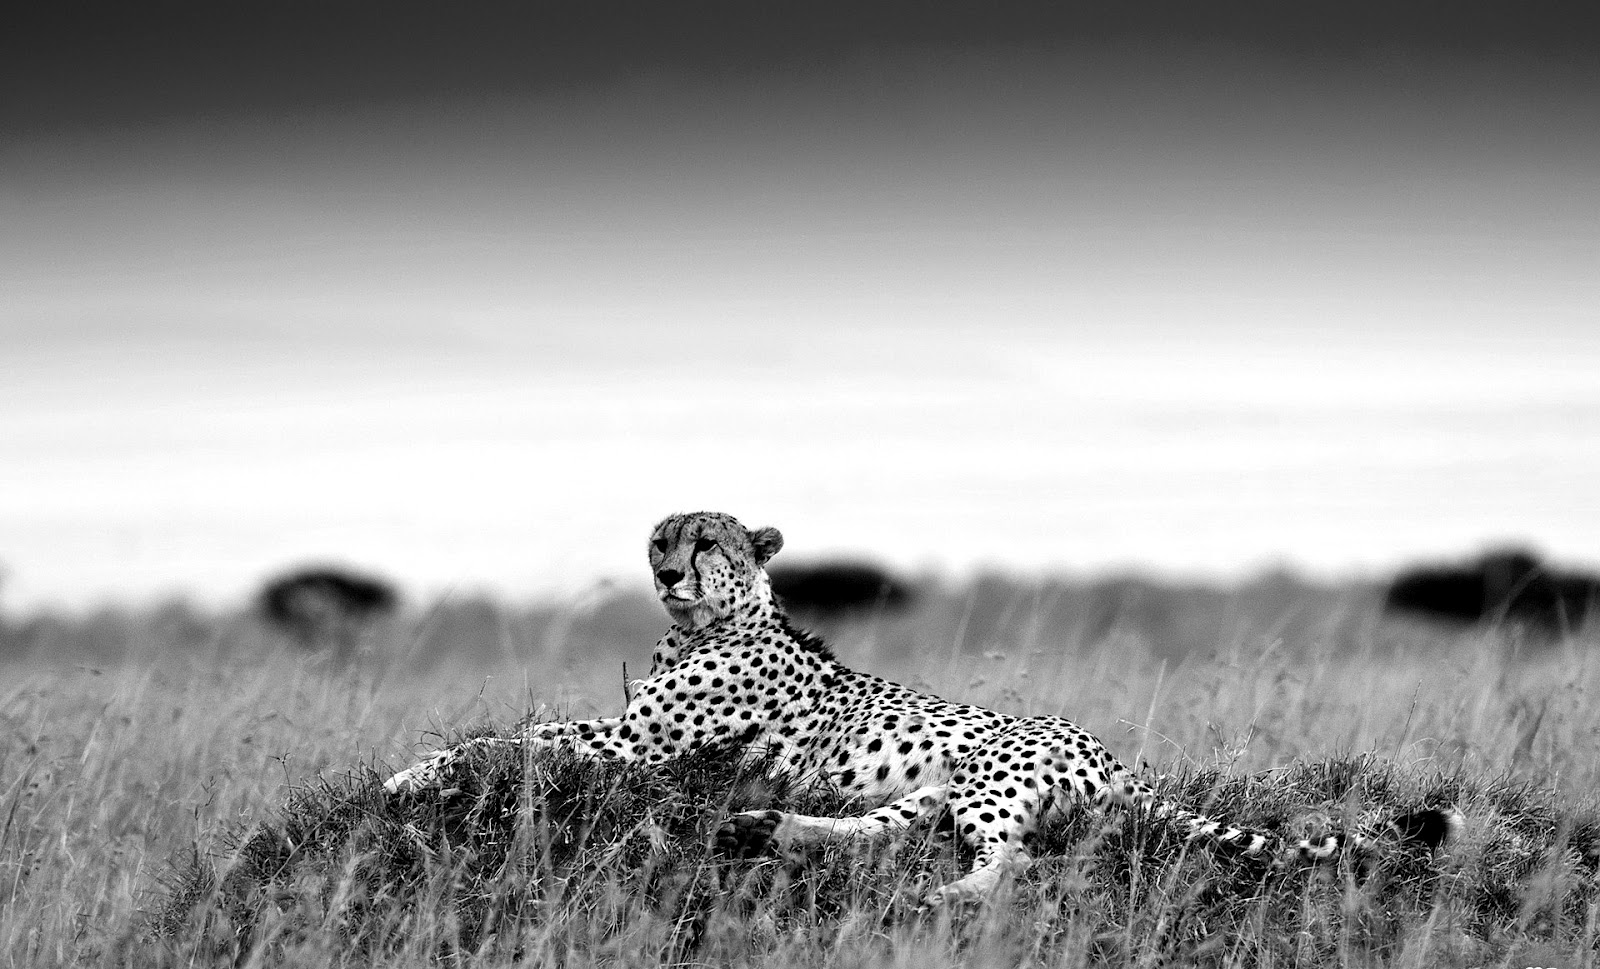 Gallery For Gt Black And White Cheetah Wallpaper